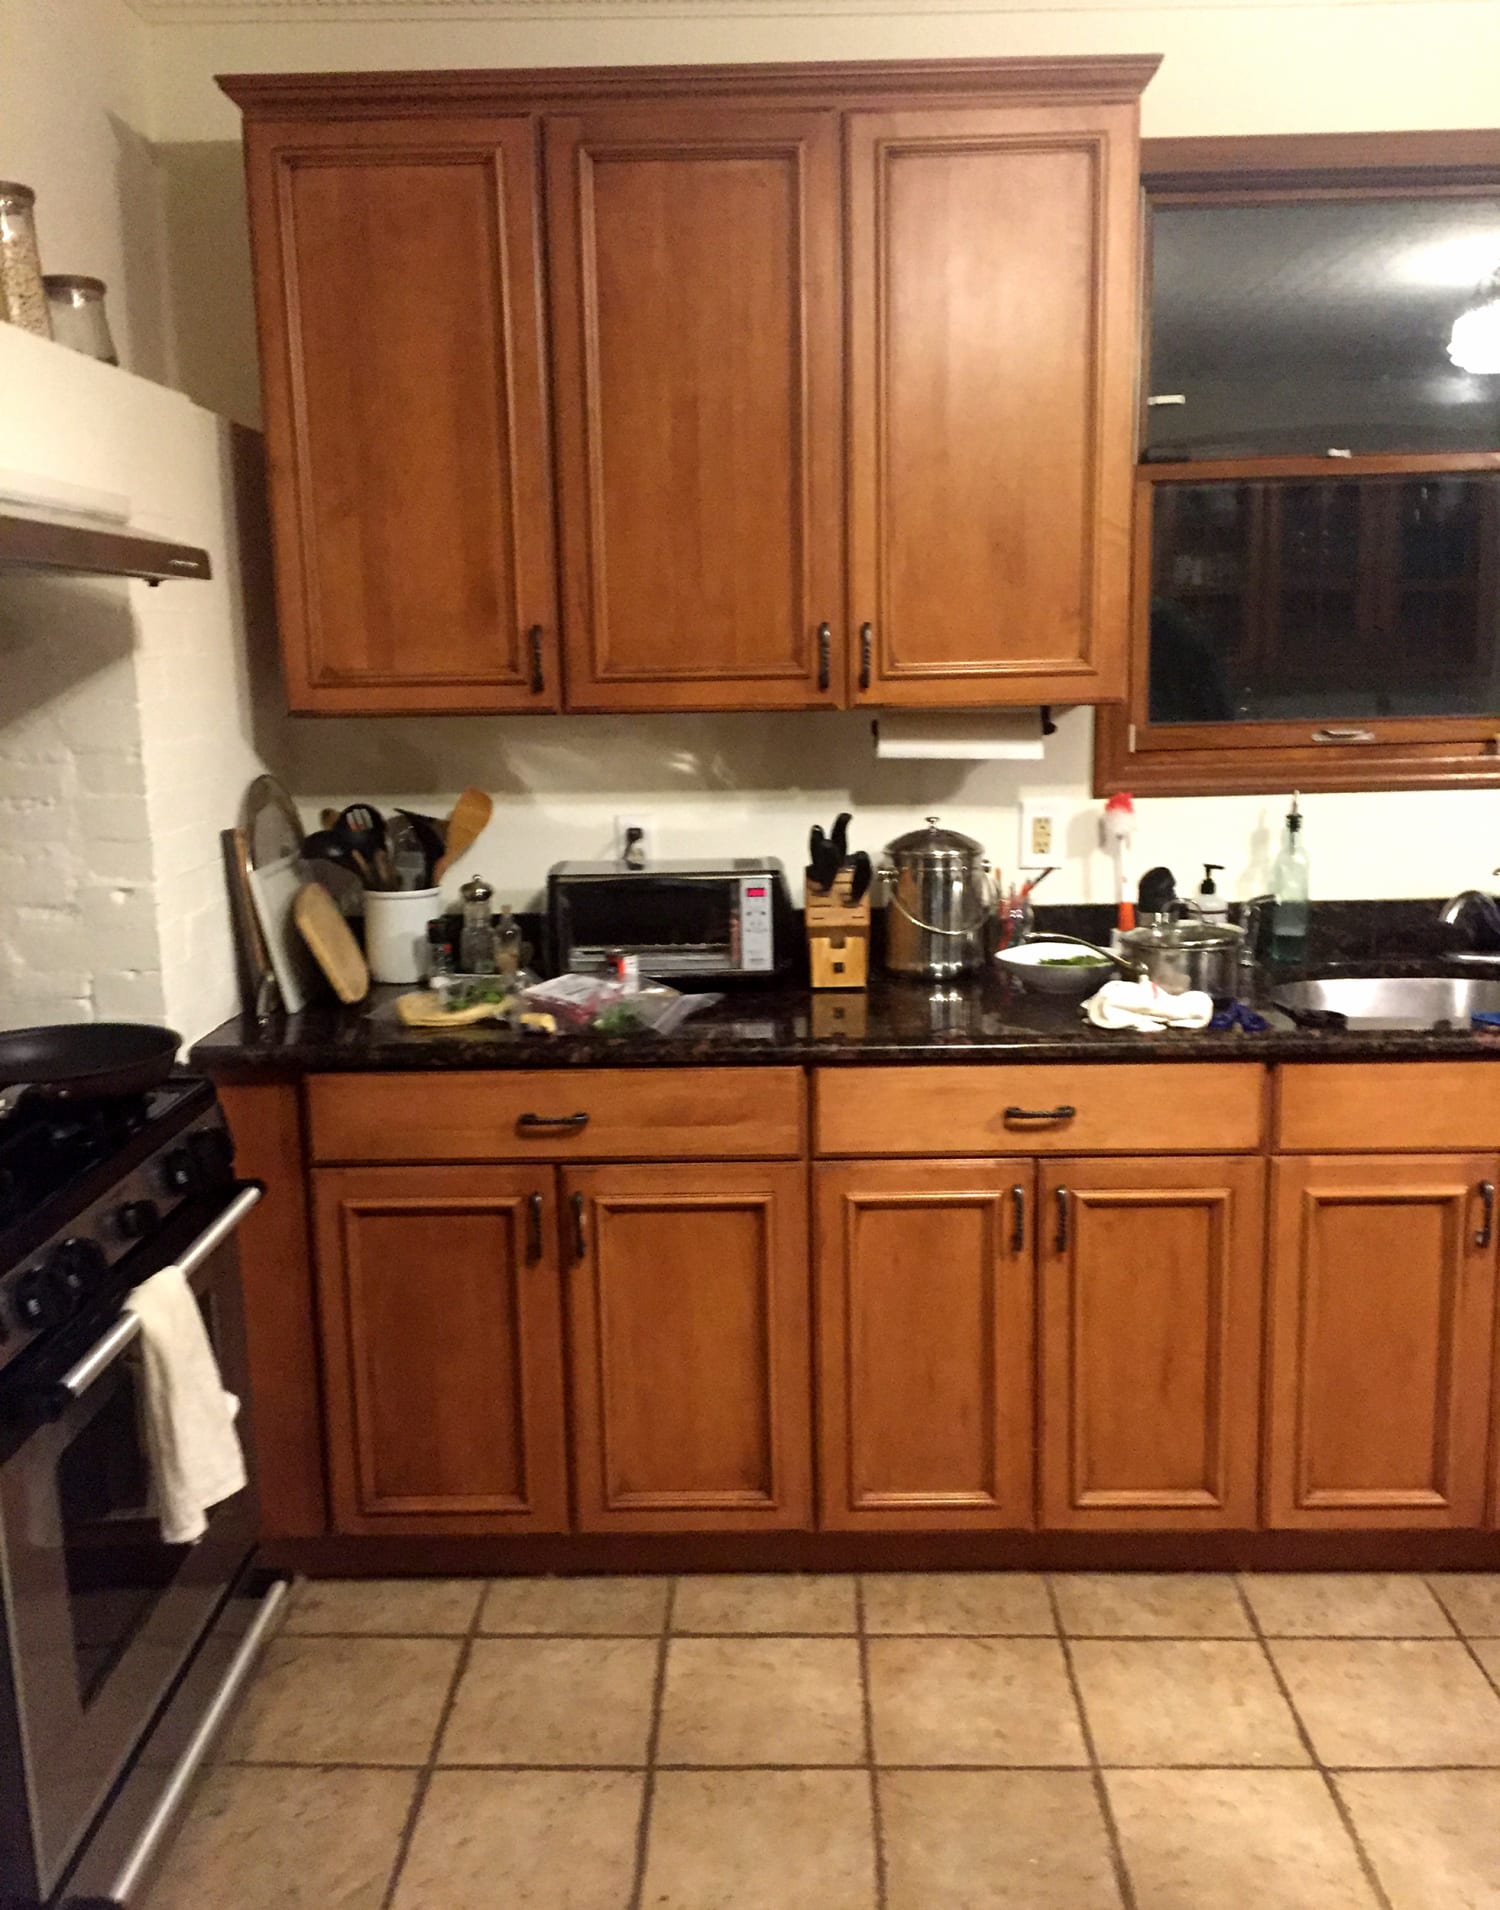 How $25 and some Chalk Paint totally transformed this kitchen